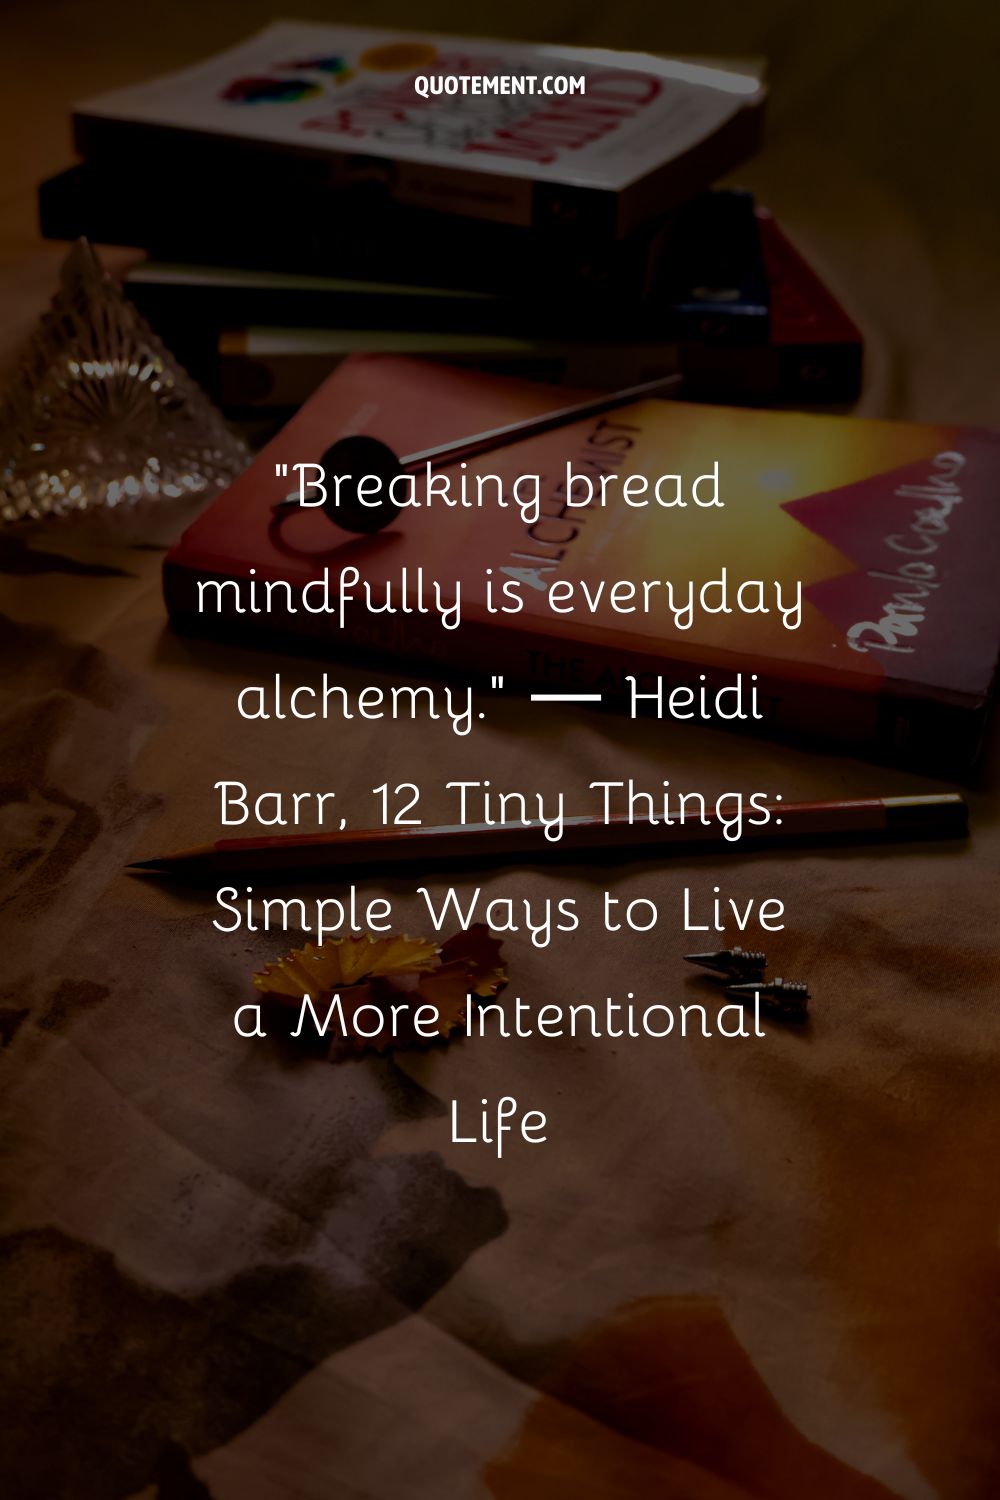 Breaking bread mindfully is everyday alchemy.